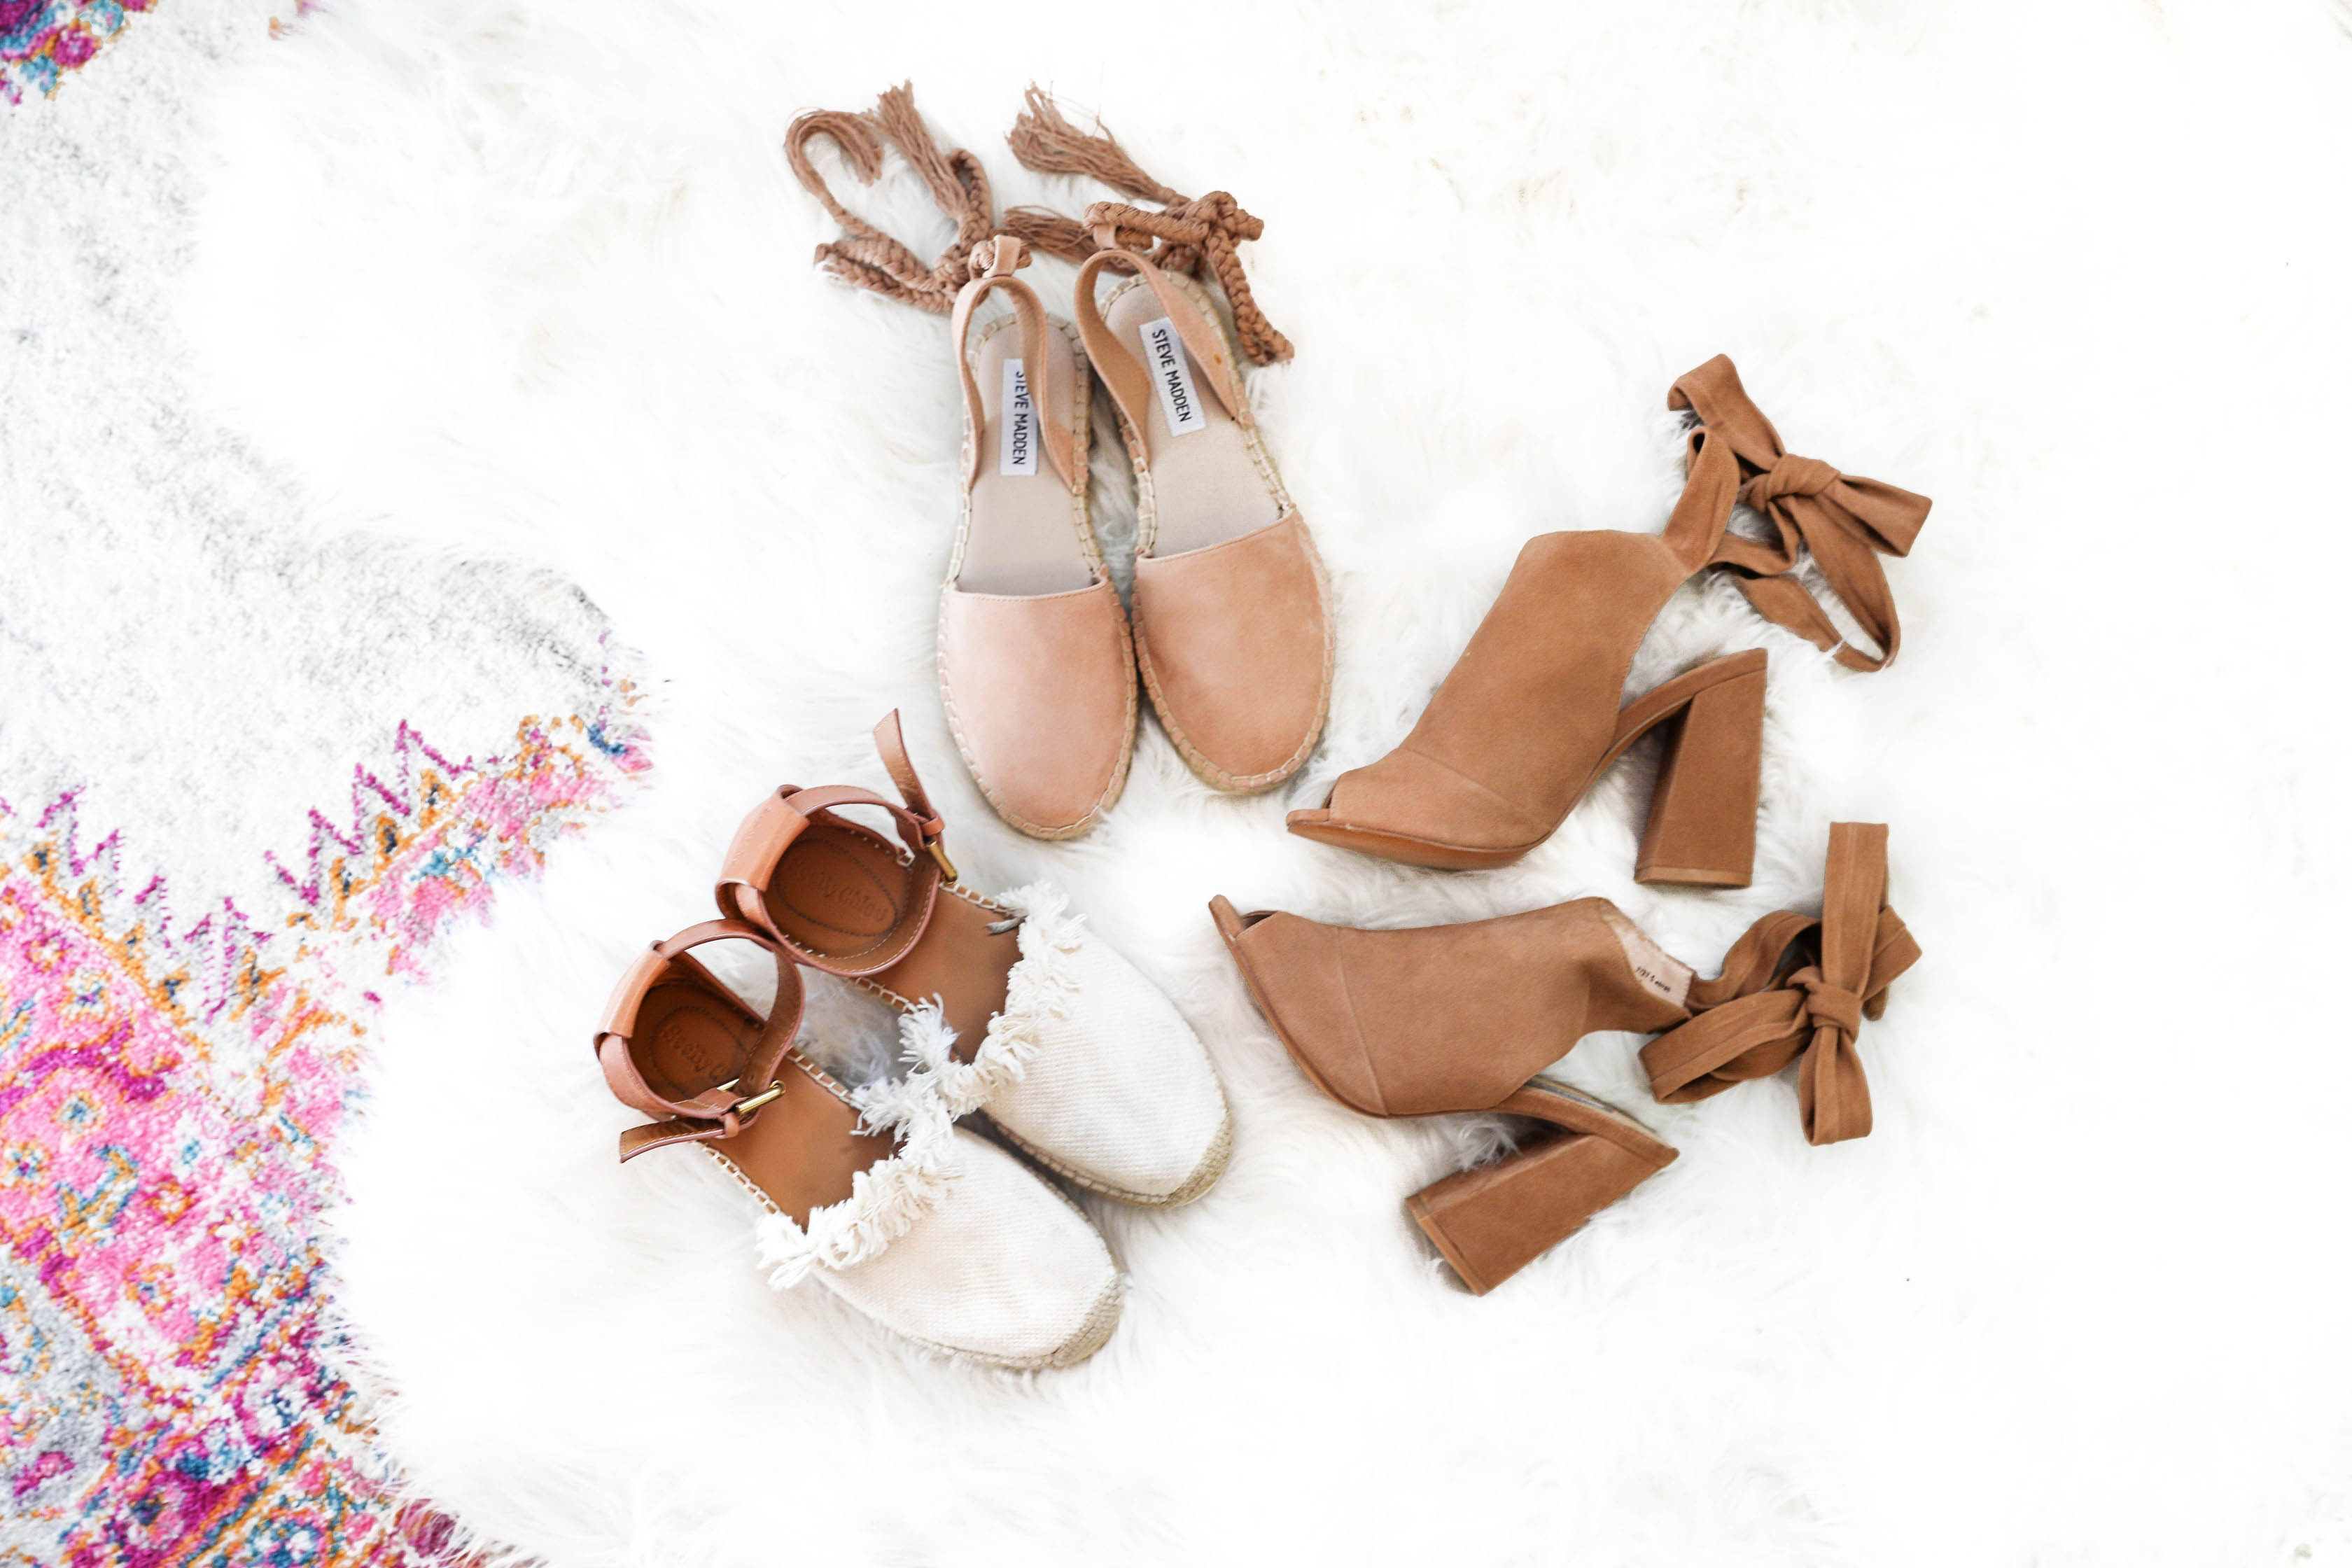 Spring shoes roundup! Sandals, wedges, heels, strappy shoes, and more! Details on fashion blog daily dose of charm by lauren Lindmark! Cute shoes flatlay on fuzzy rug